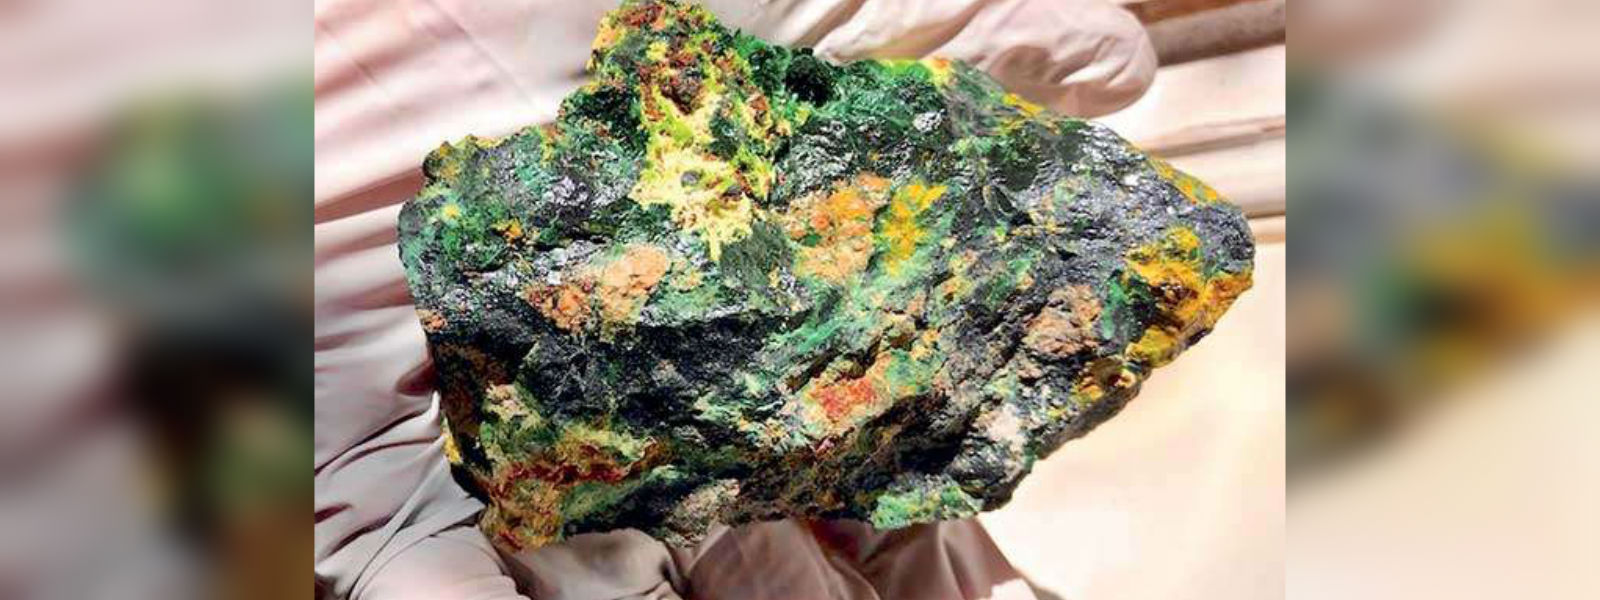 Radioactive minerals discovered in the Aluthgama-Galle region